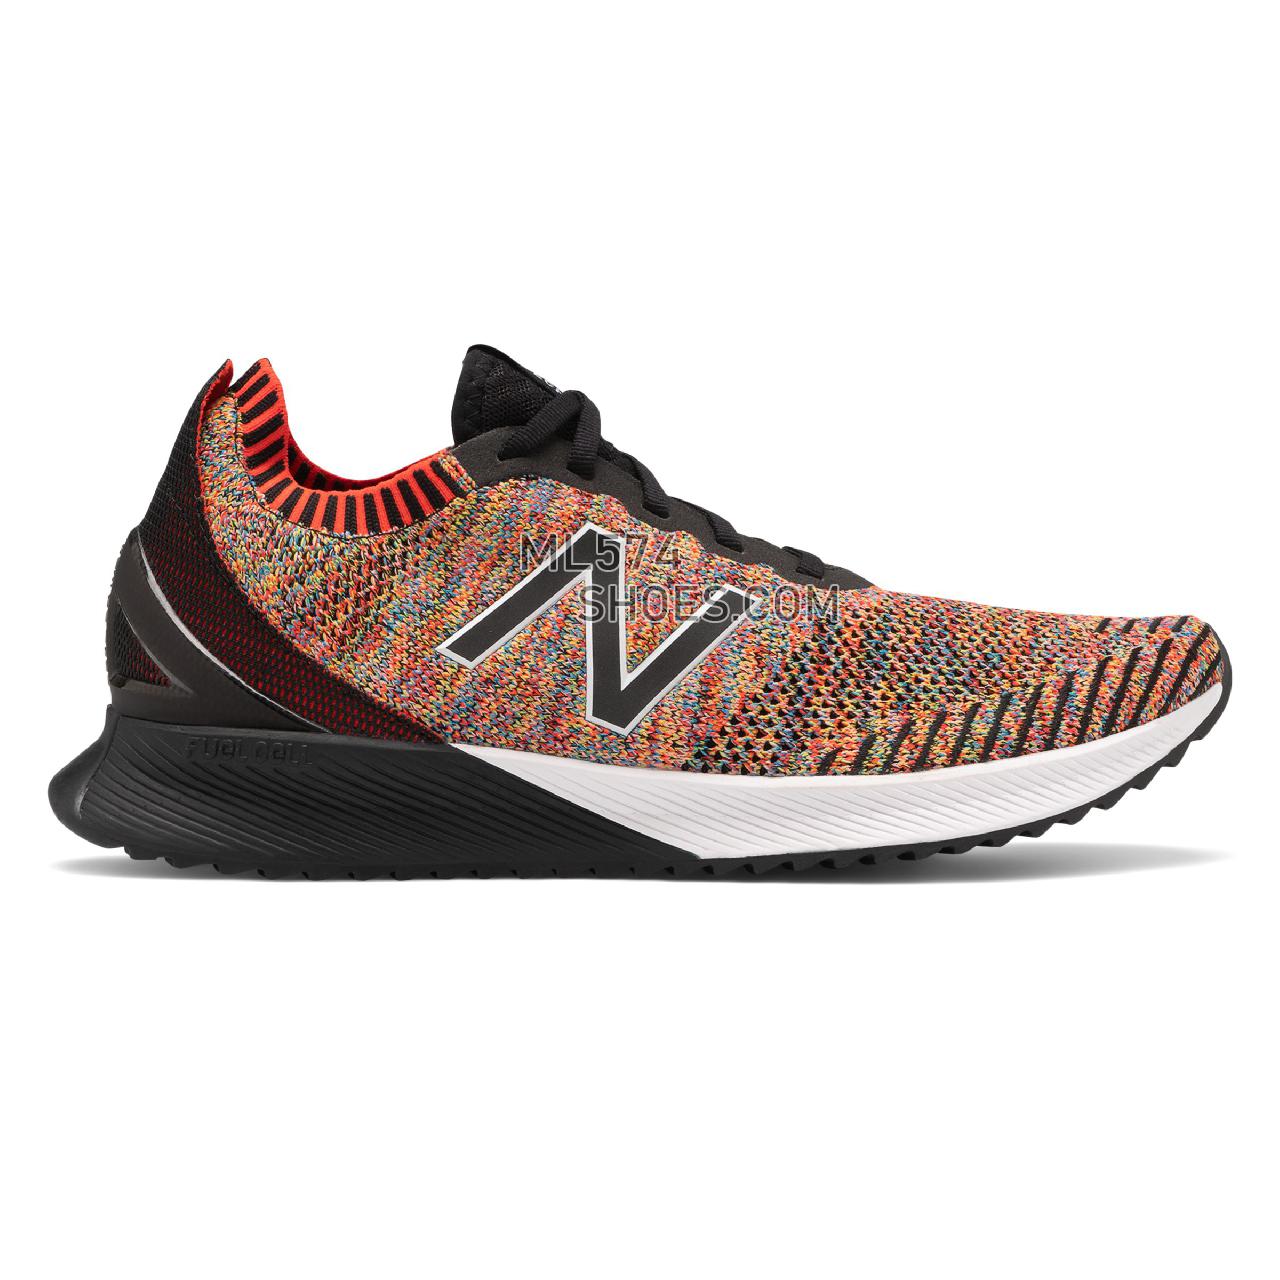 New Balance FuelCell Echo - Men's Neutral Running - Neo Flame with Sulphur Yellow and Vision Blue - MFCECCM